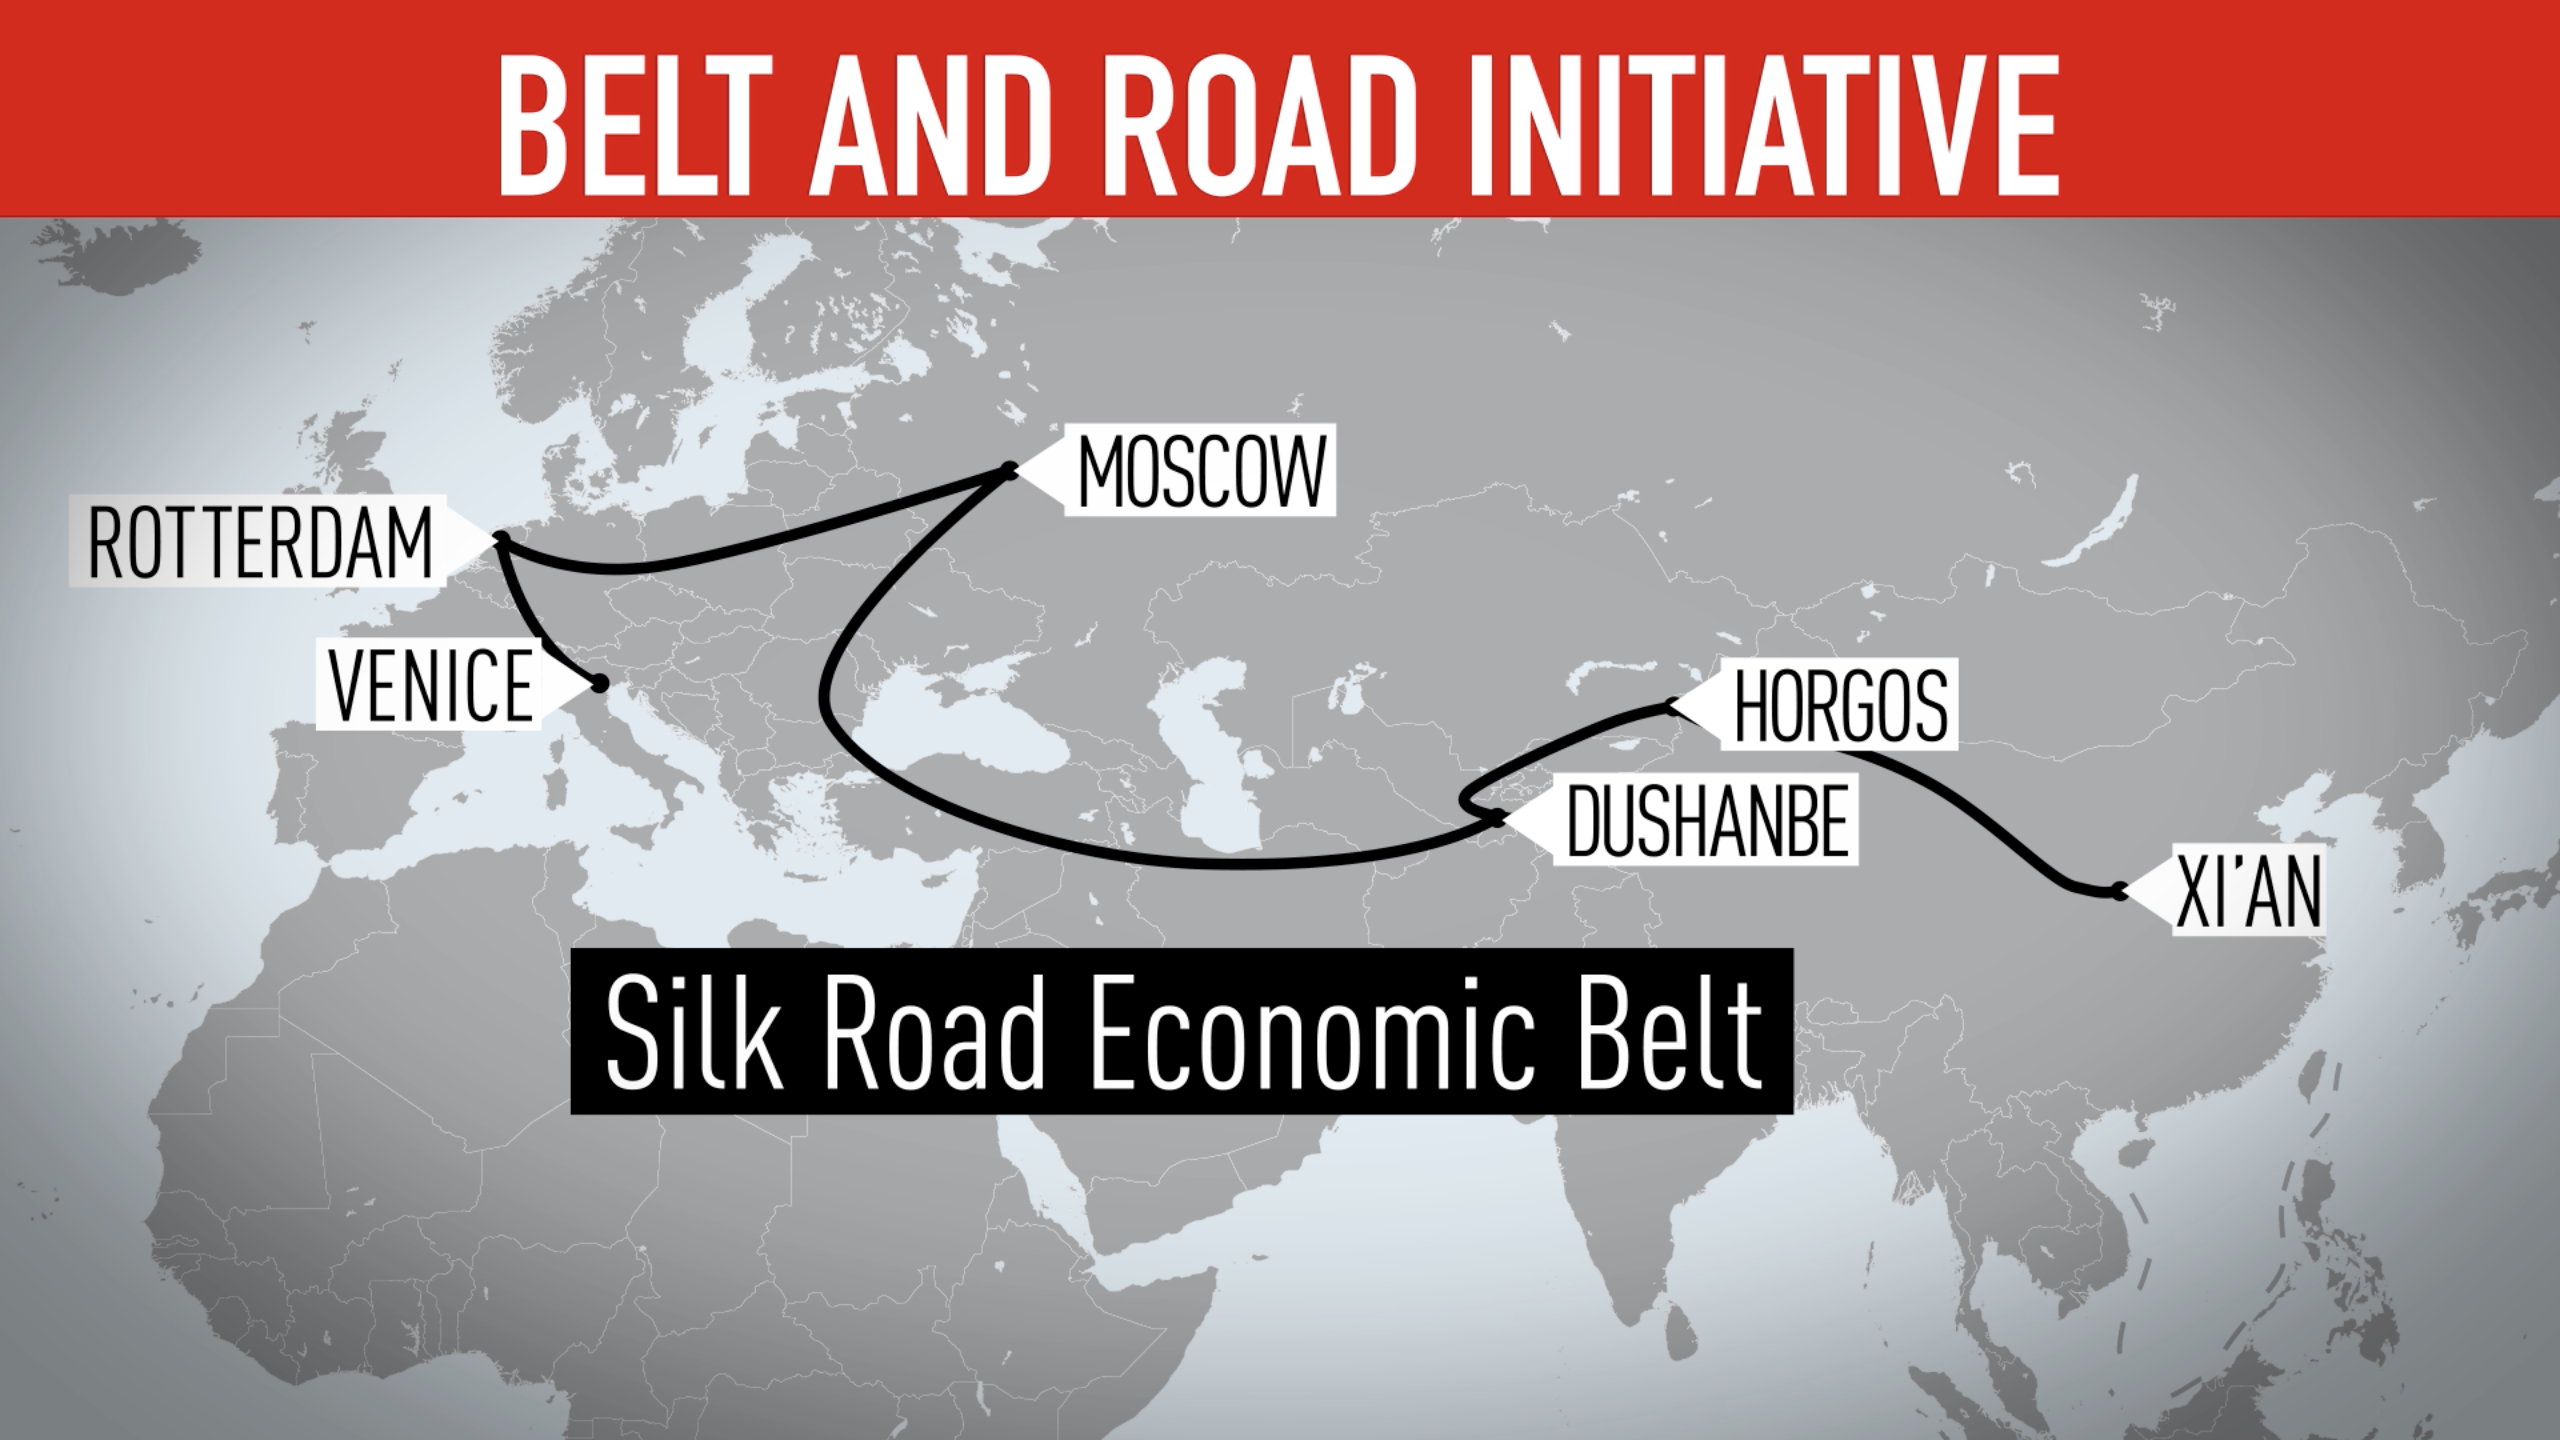 The Silk Road Economic Belt links China to Central Asia and Europe. /CGTN